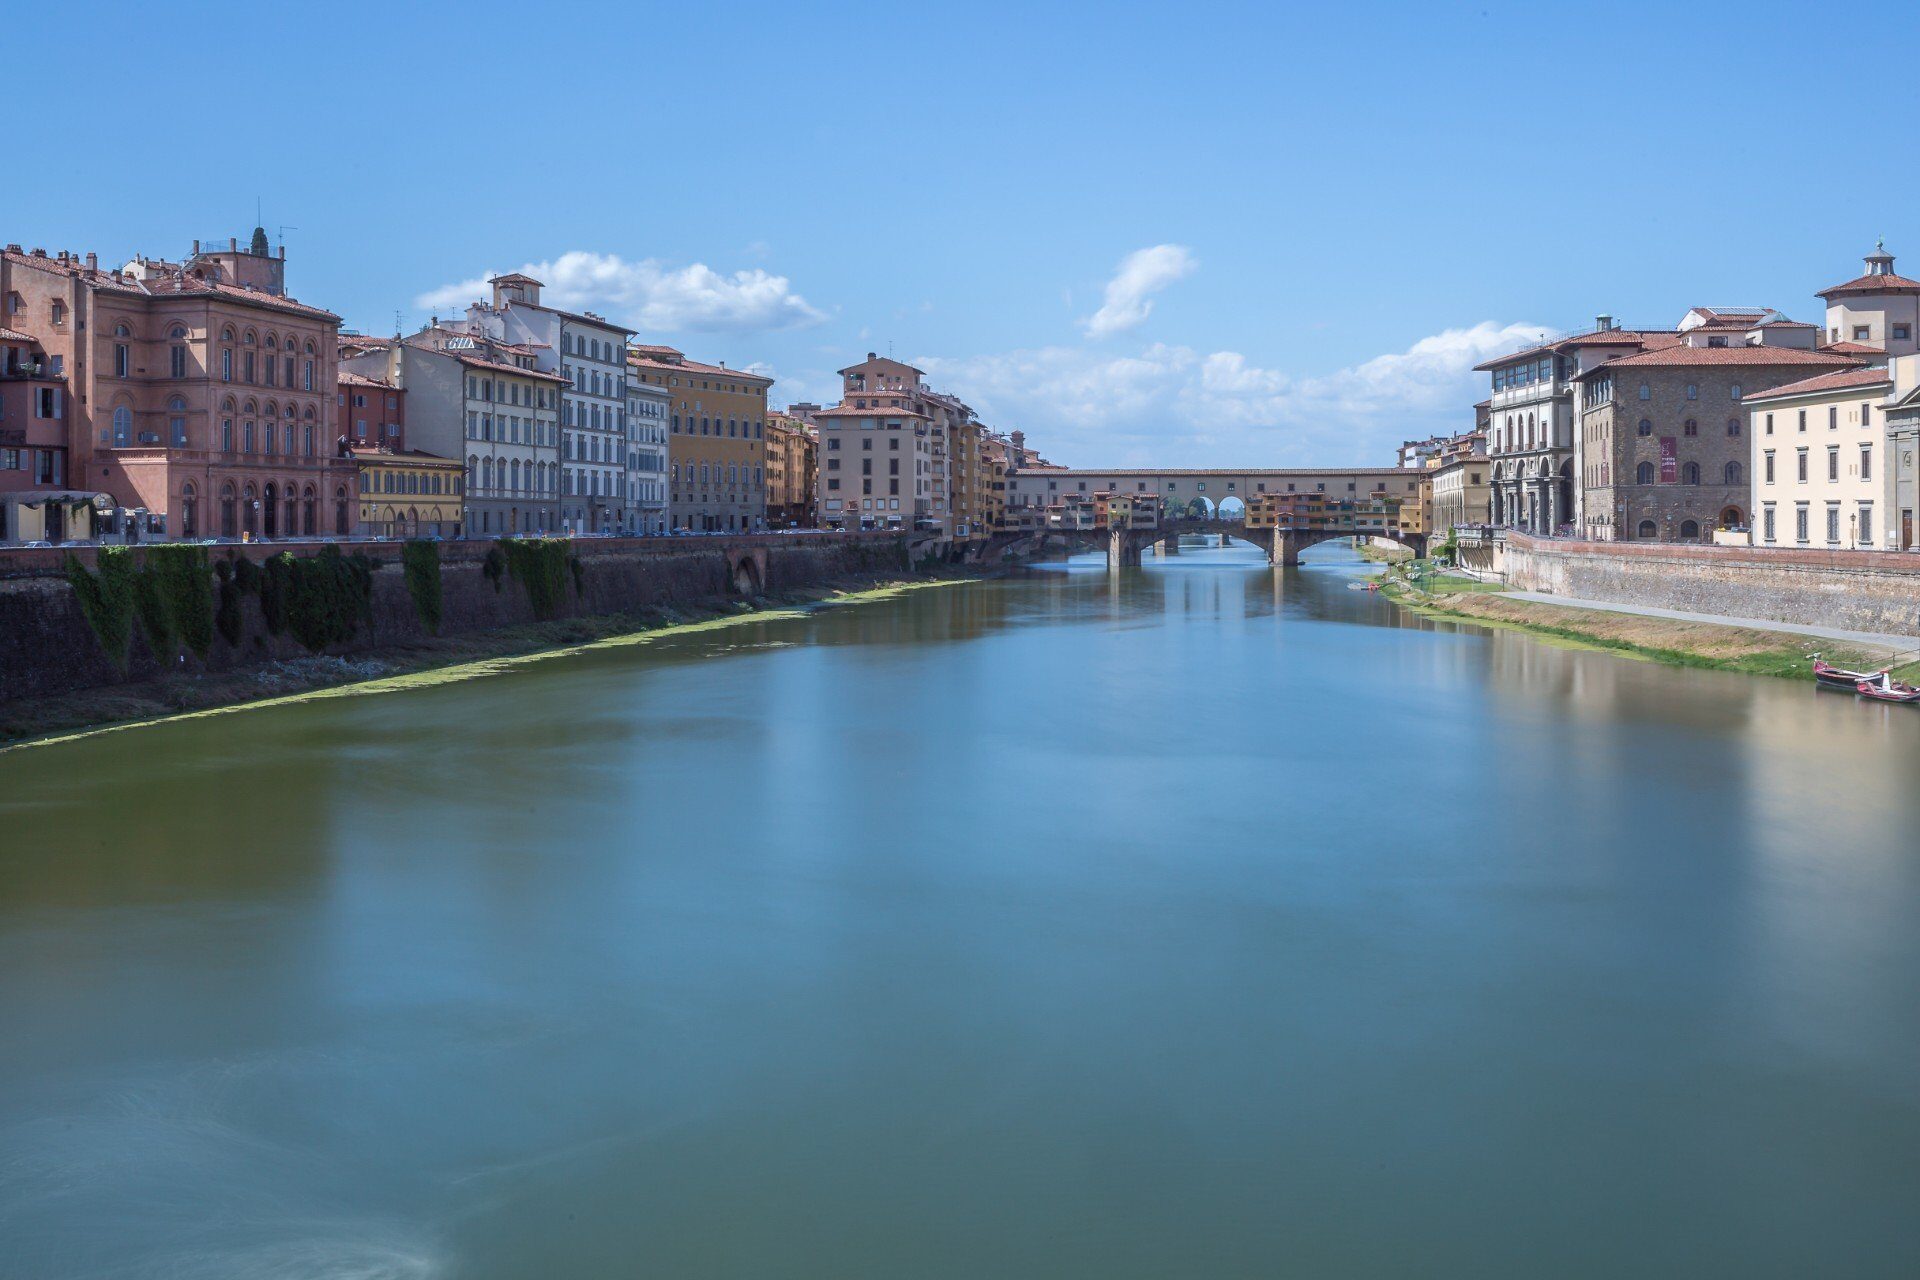 https://www.celebritycruises.com/blog/content/uploads/2023/05/what-is-florence-known-for-the-ponte-vecchio-hero.jpg